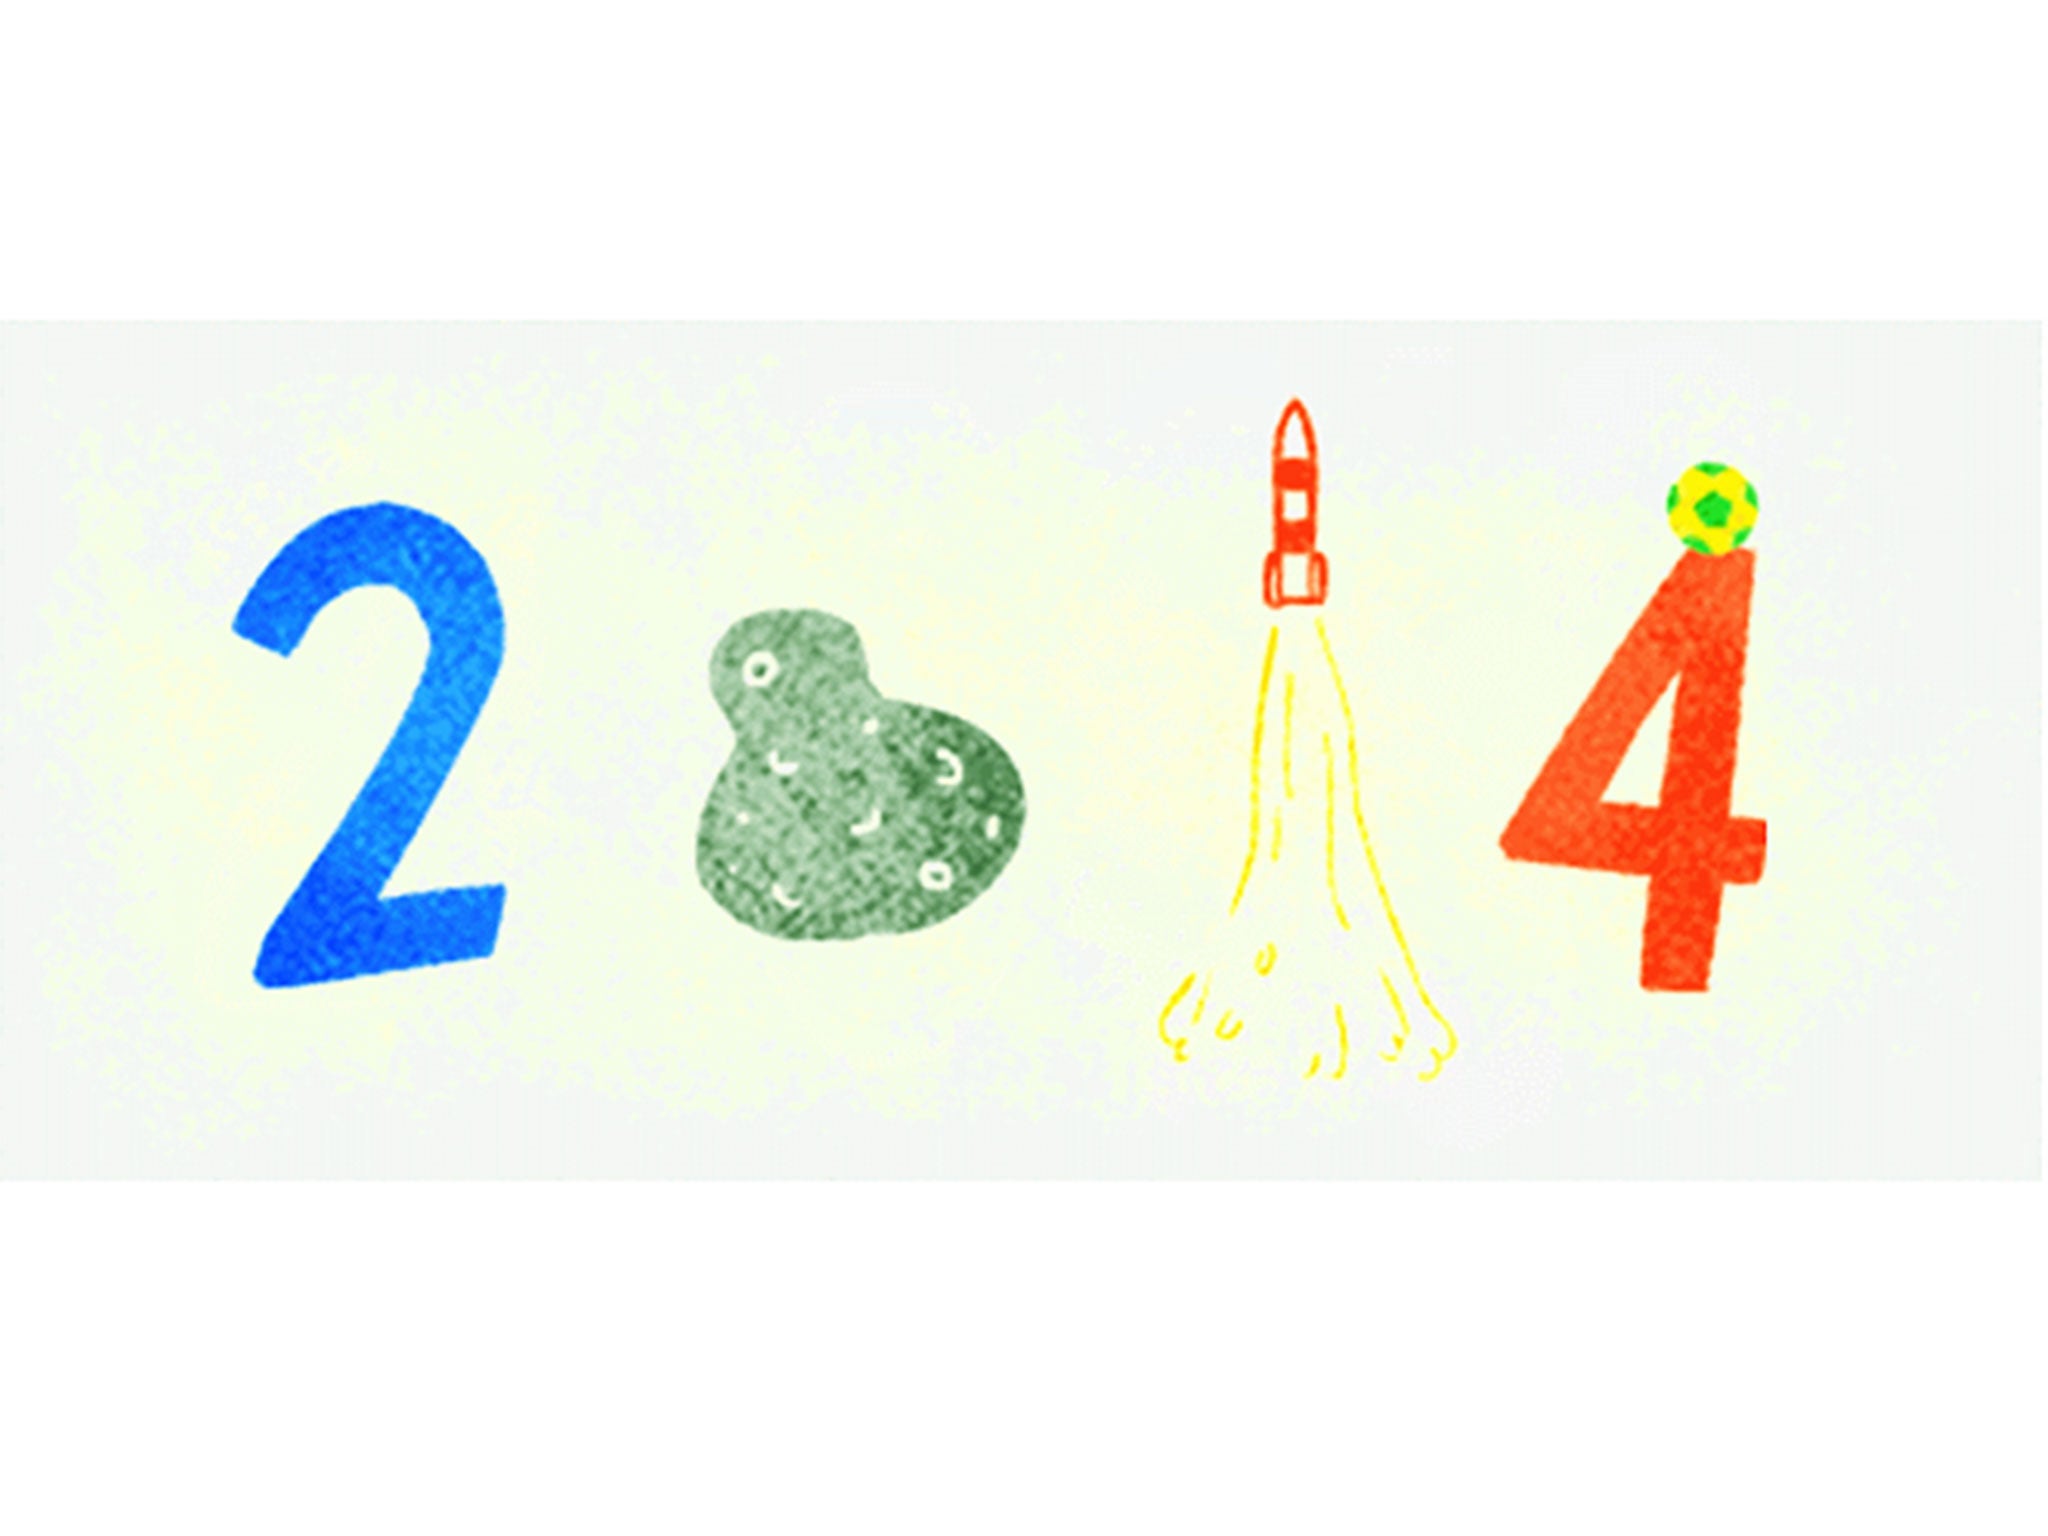 Google Celebrates Fifa World Cup 2014 With Daily Doodles